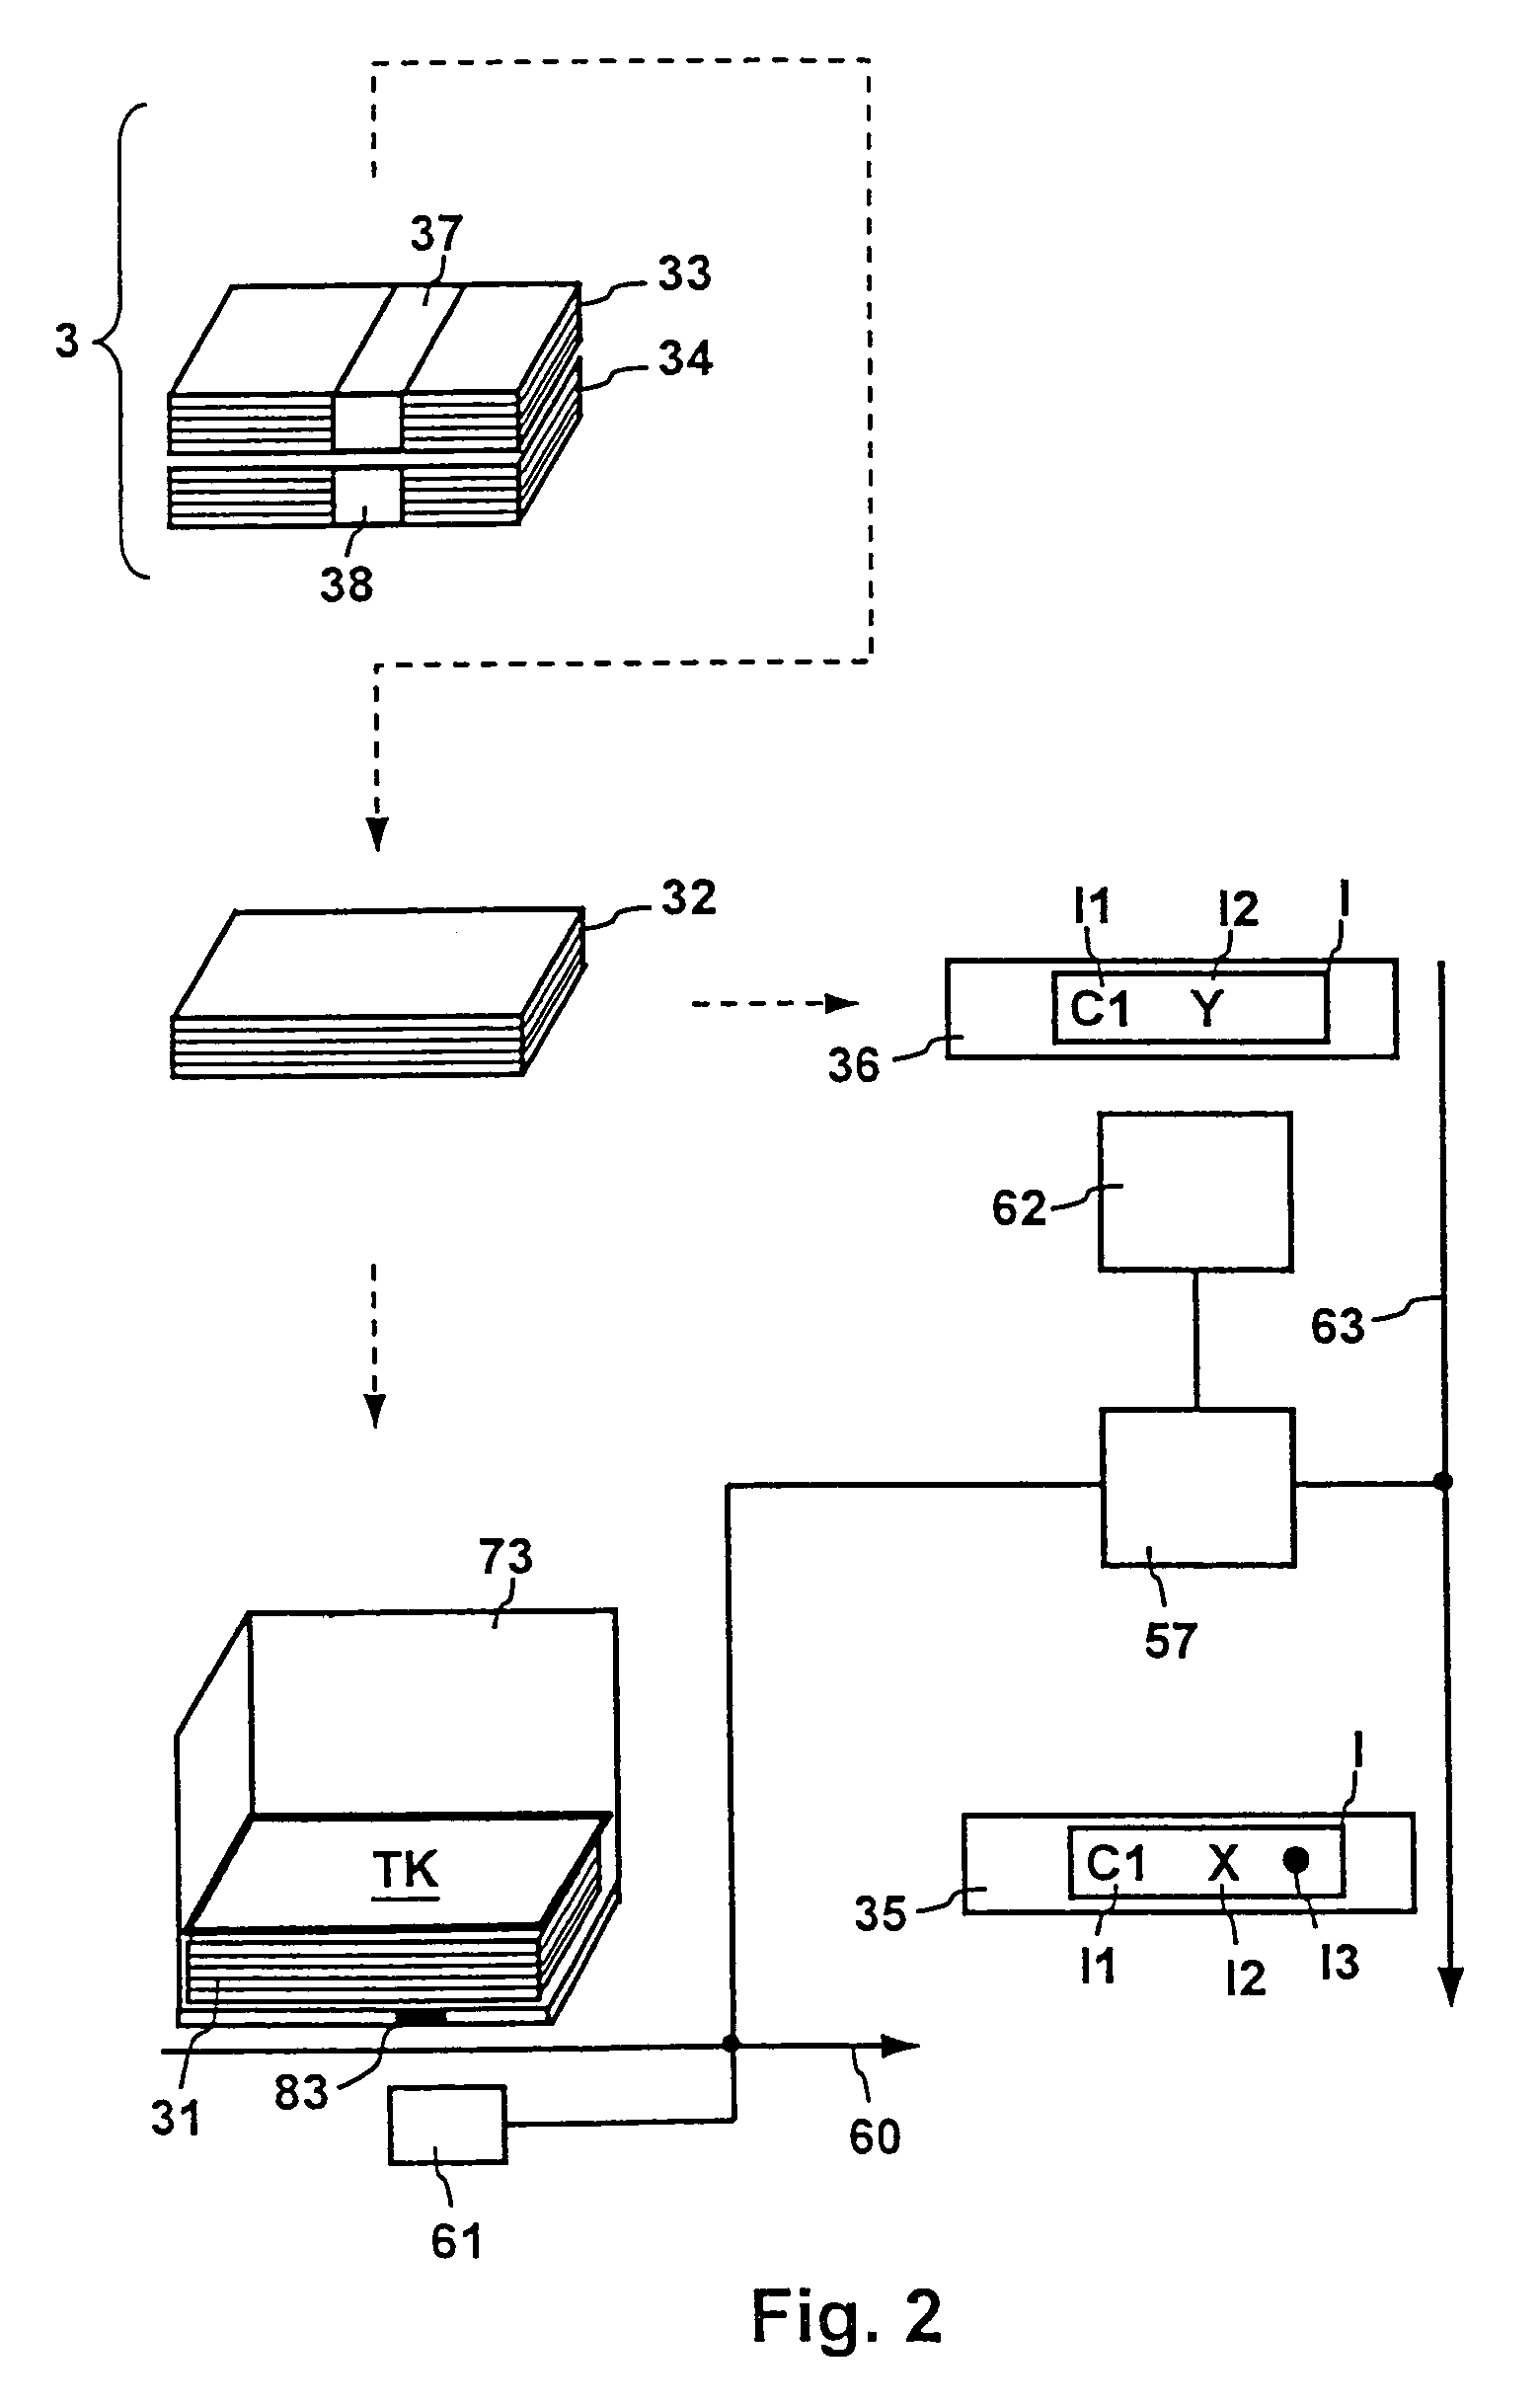 Apparatus and method for processing bank notes